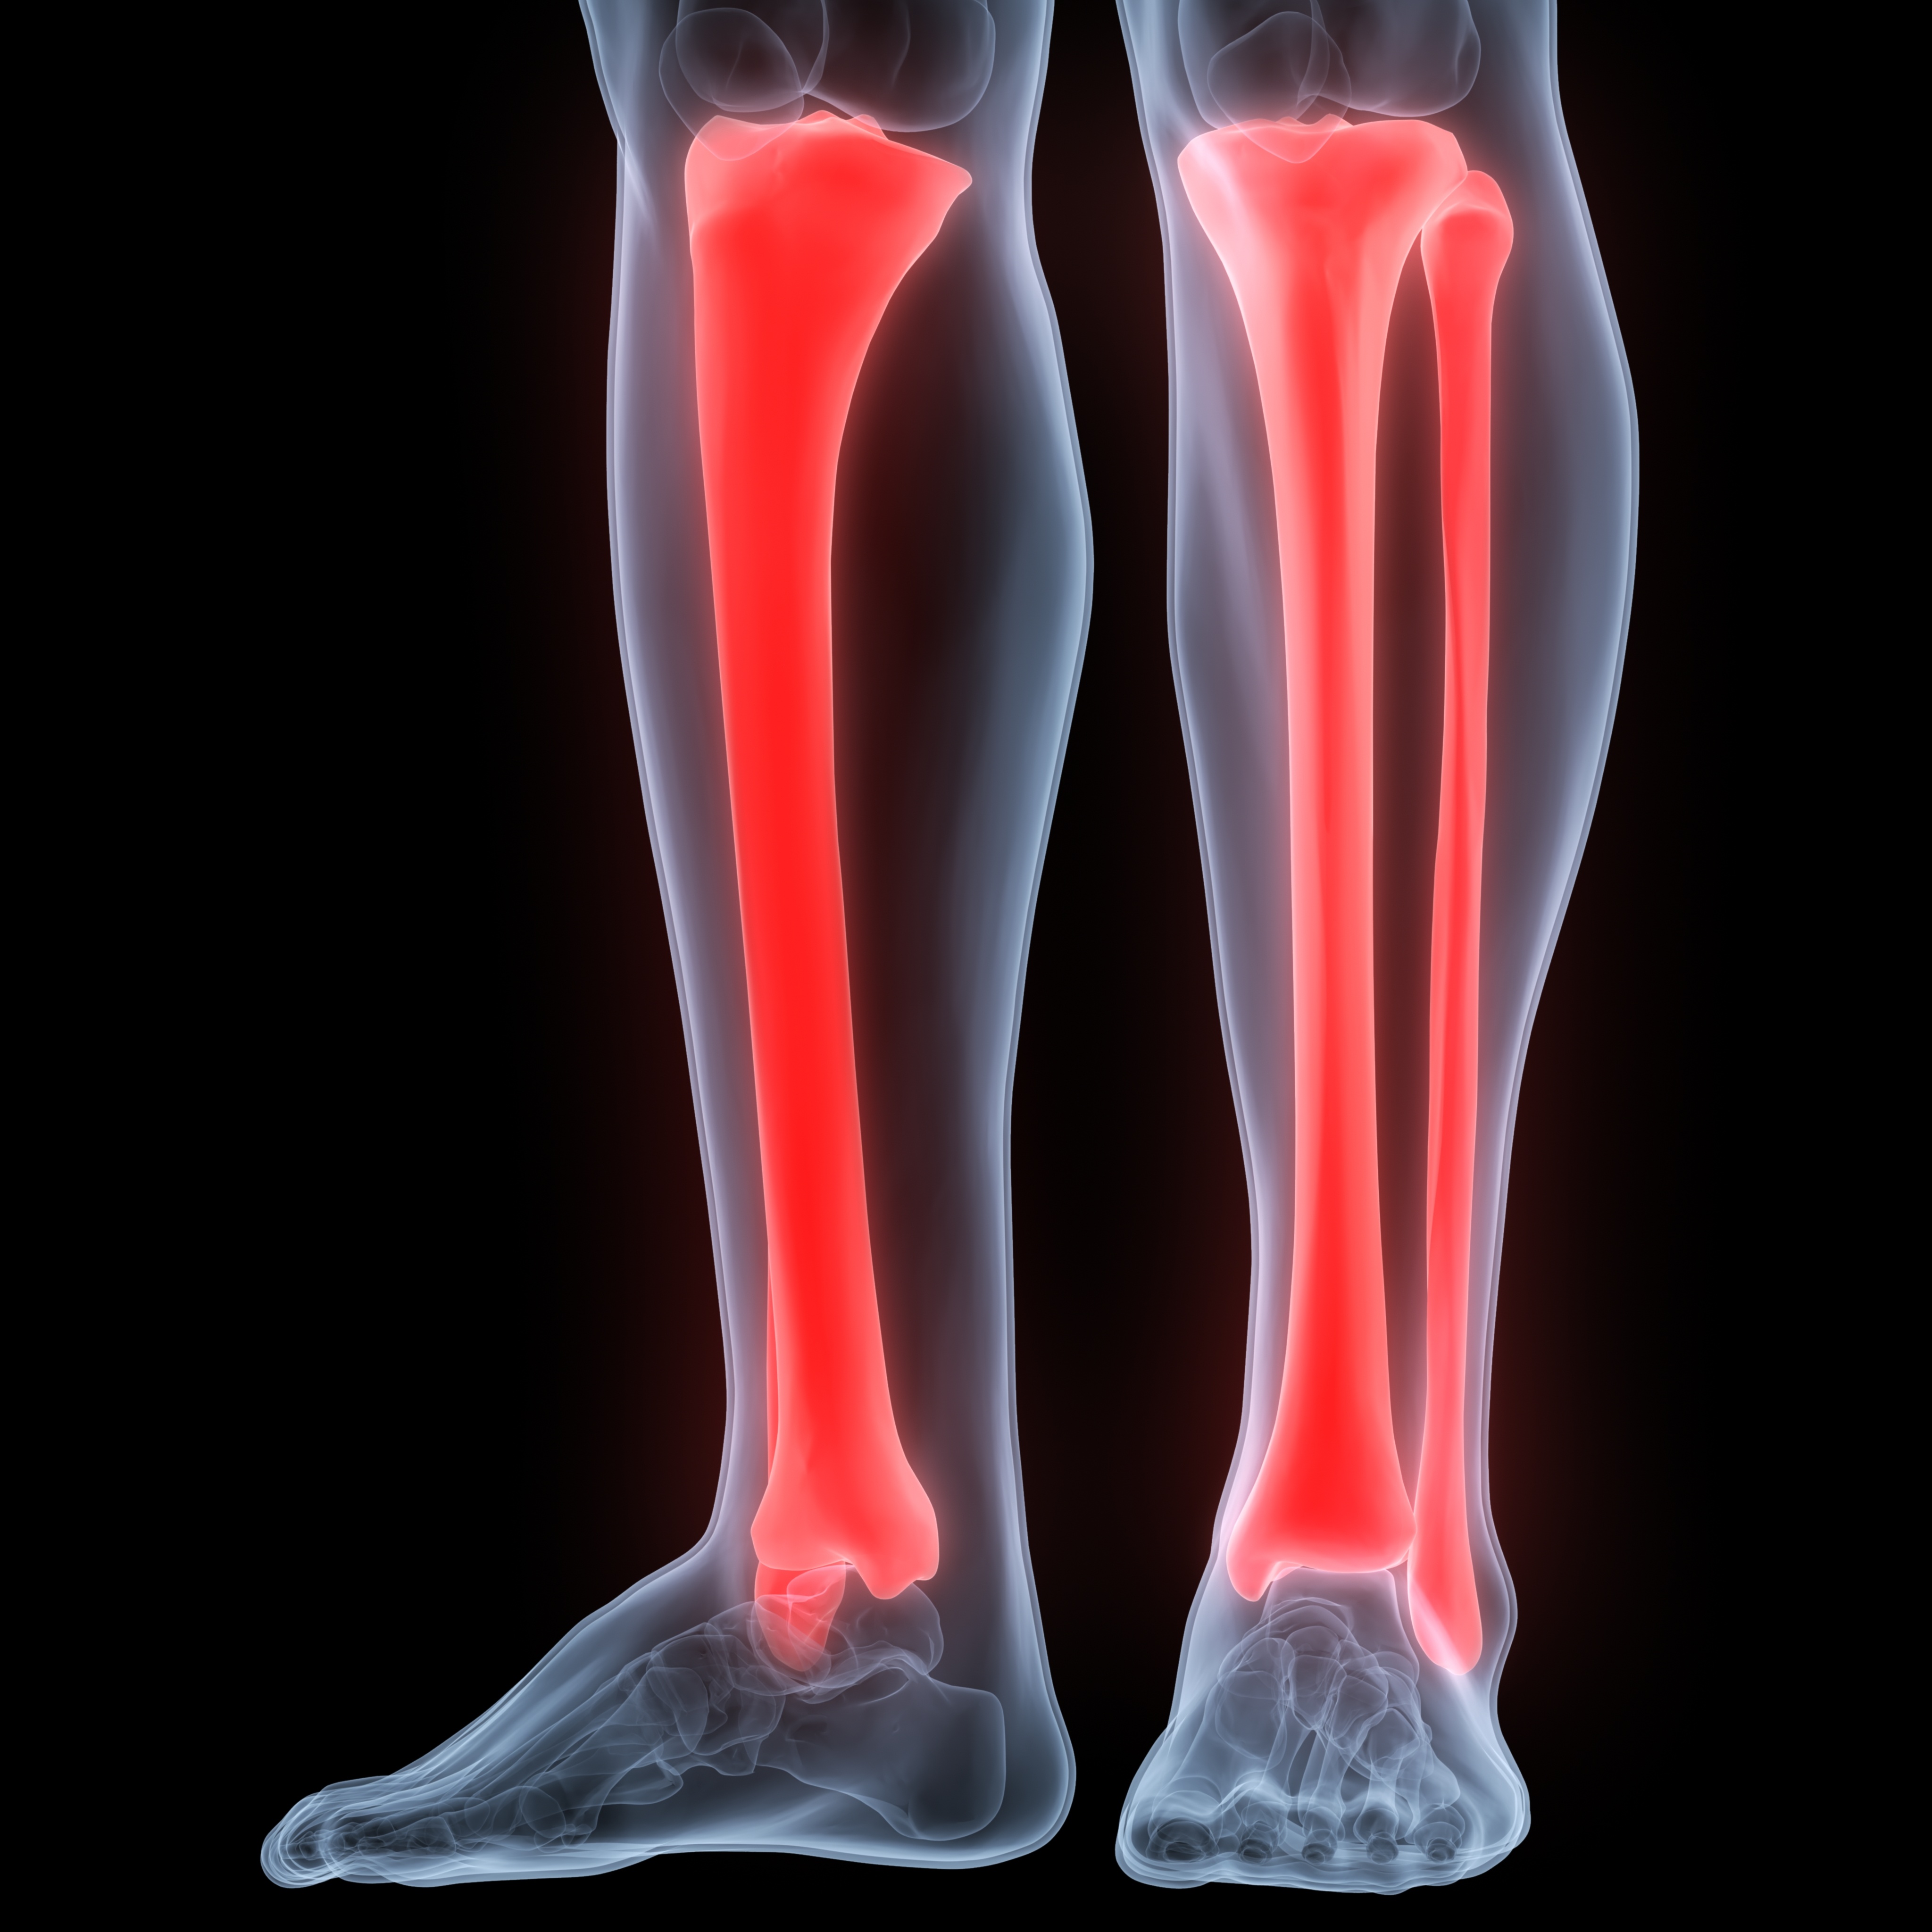 Tibial Fracture after Accident | The Vrana Law Firm ...